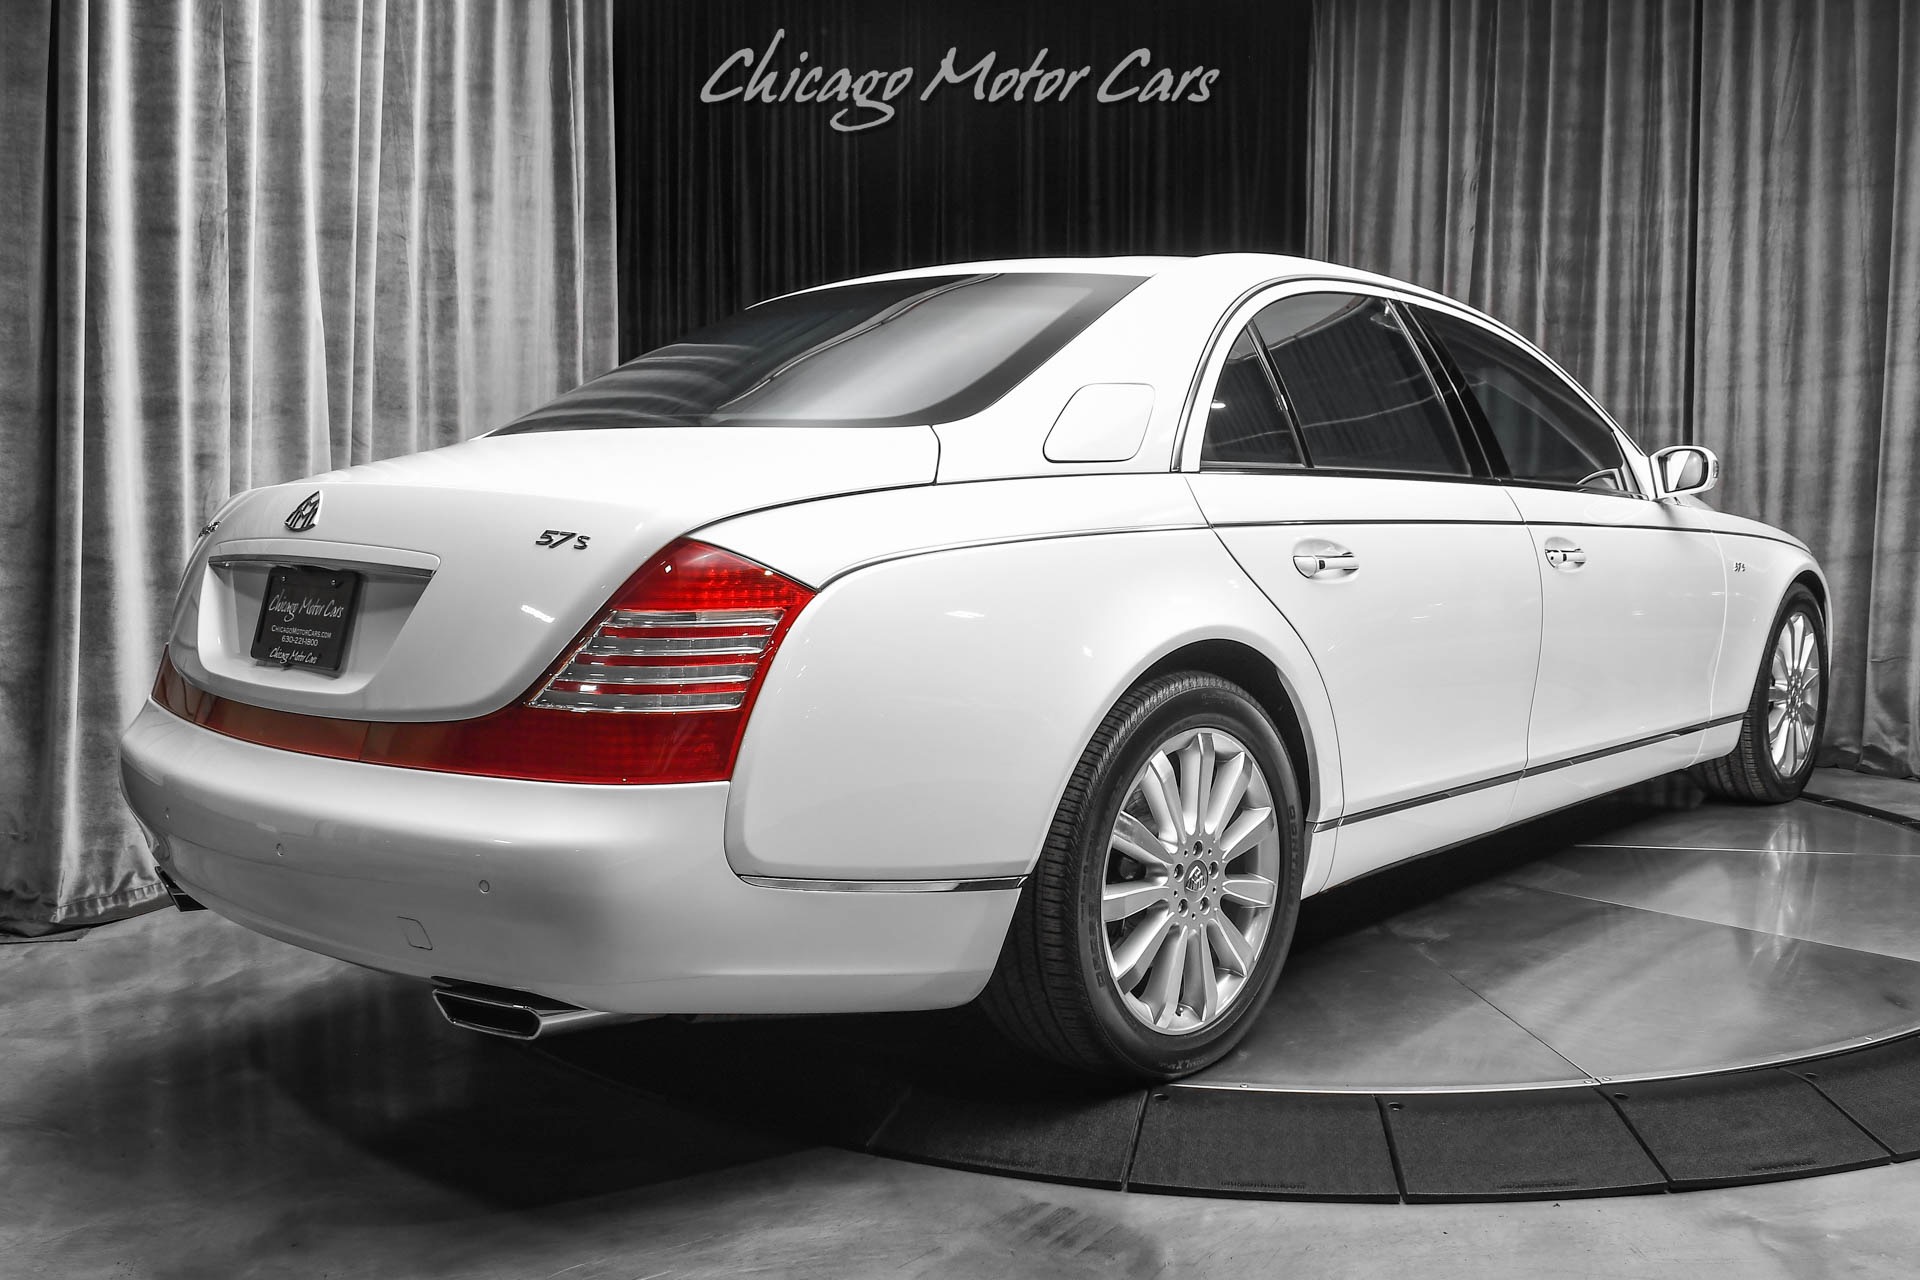 Used-2007-Maybach-57-S-RARE-White-on-White-PINNACLE-of-Luxury-MSRP-375K-Carbon-Trim